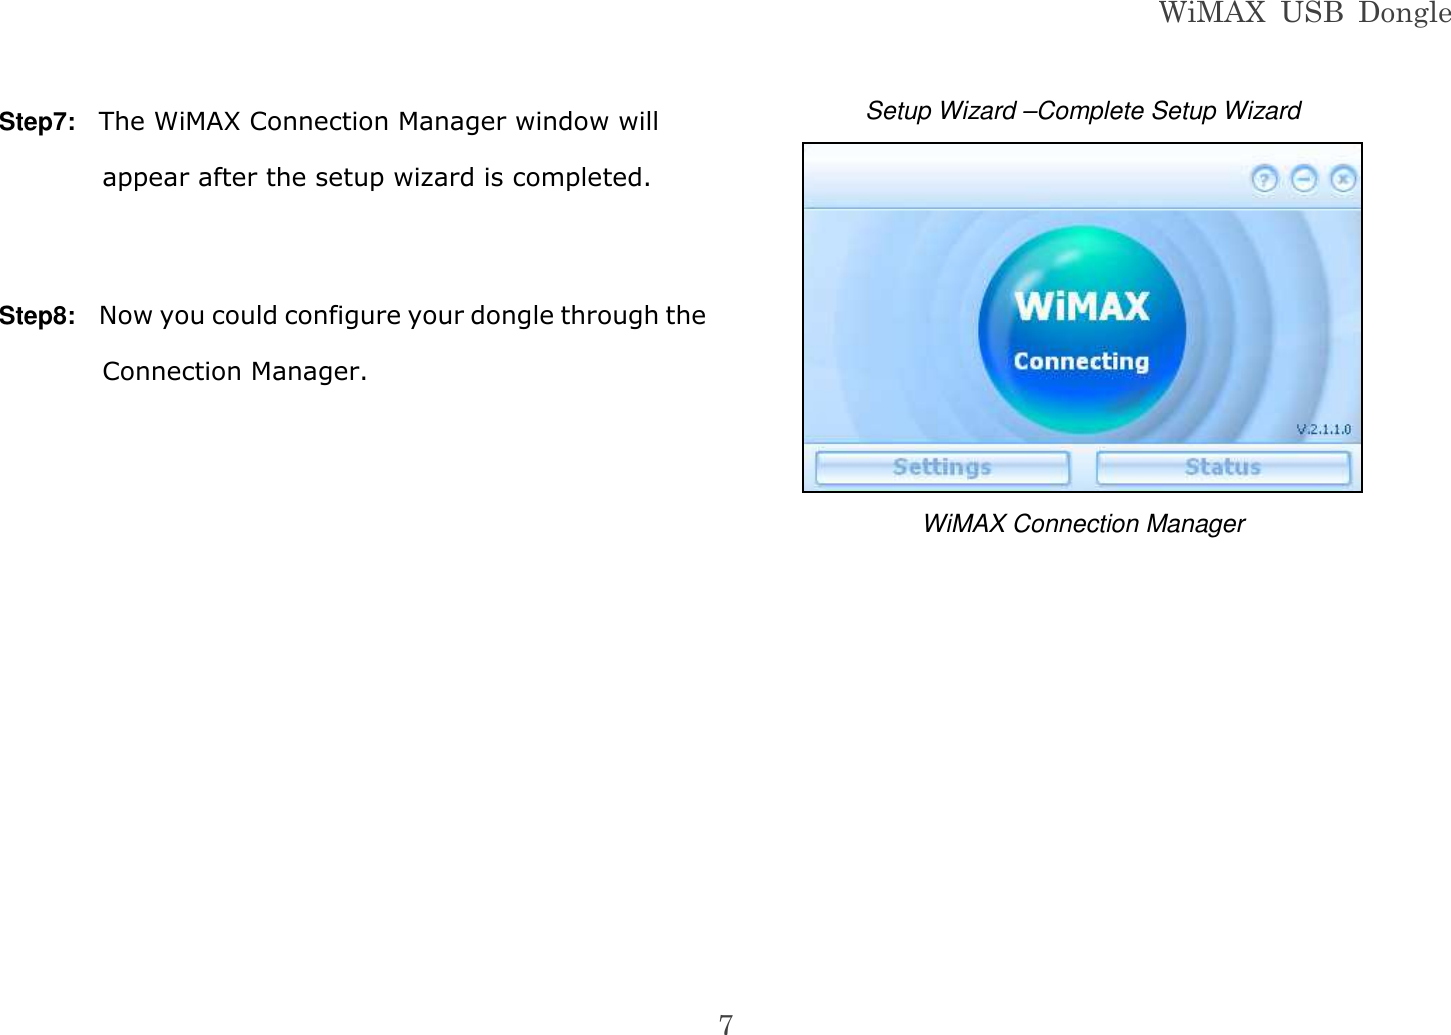 WiMAX  USB  Dongle  7 Step7:  The WiMAX Connection Manager window will appear after the setup wizard is completed.  Step8:  Now you could configure your dongle through the Connection Manager.  Setup Wizard –Complete Setup Wizard  WiMAX Connection Manager       